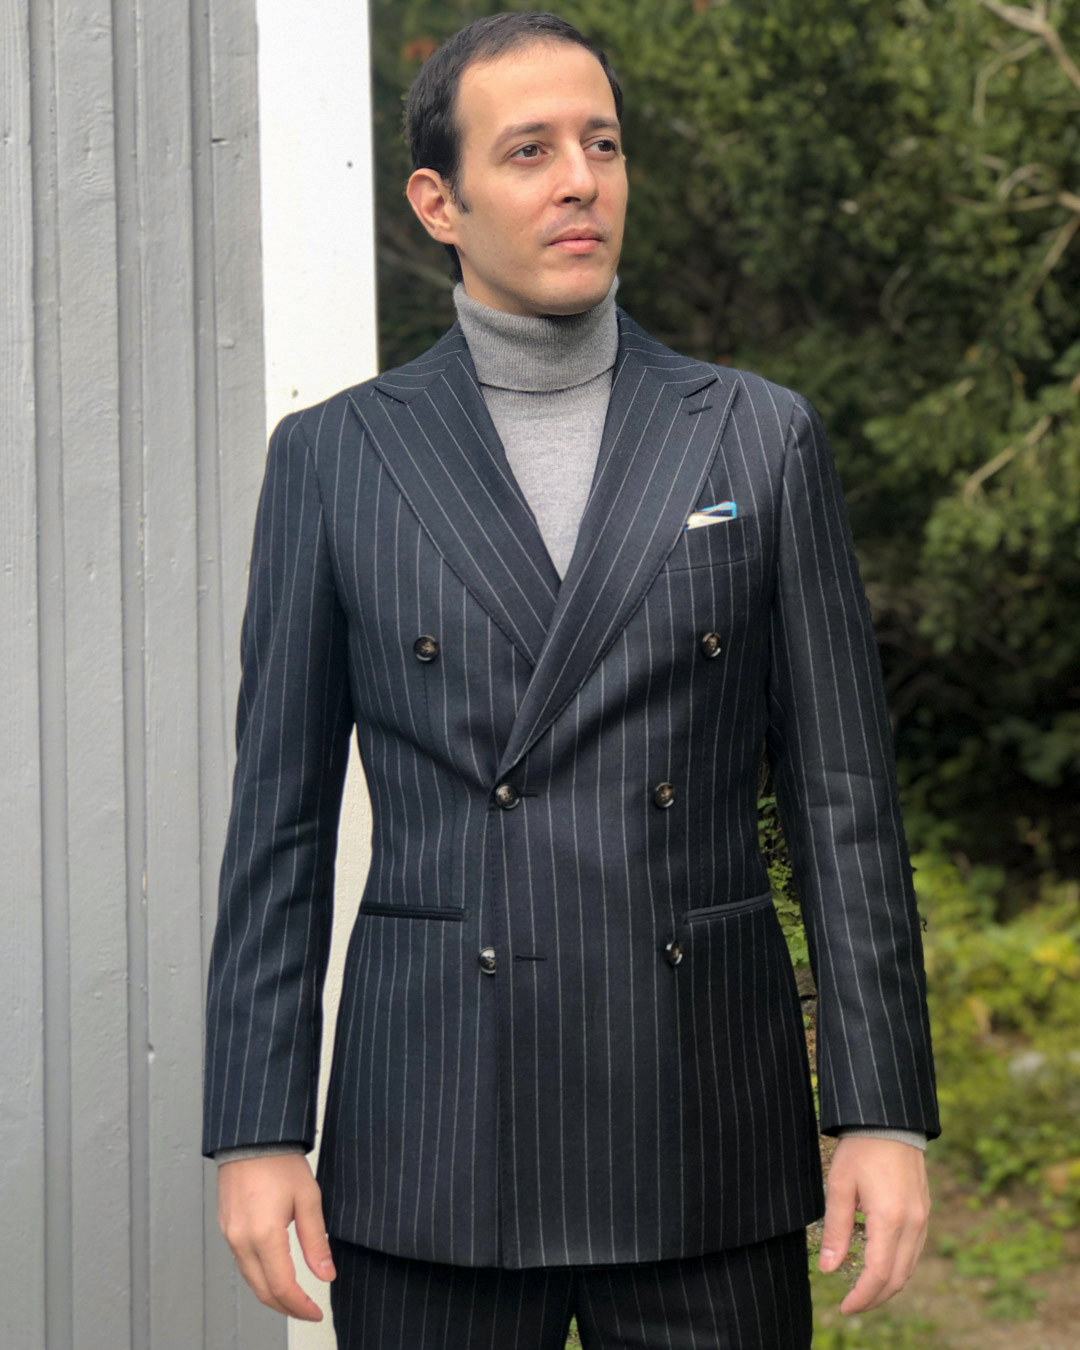 wearing a charcoal grey suit with a grey turtleneck